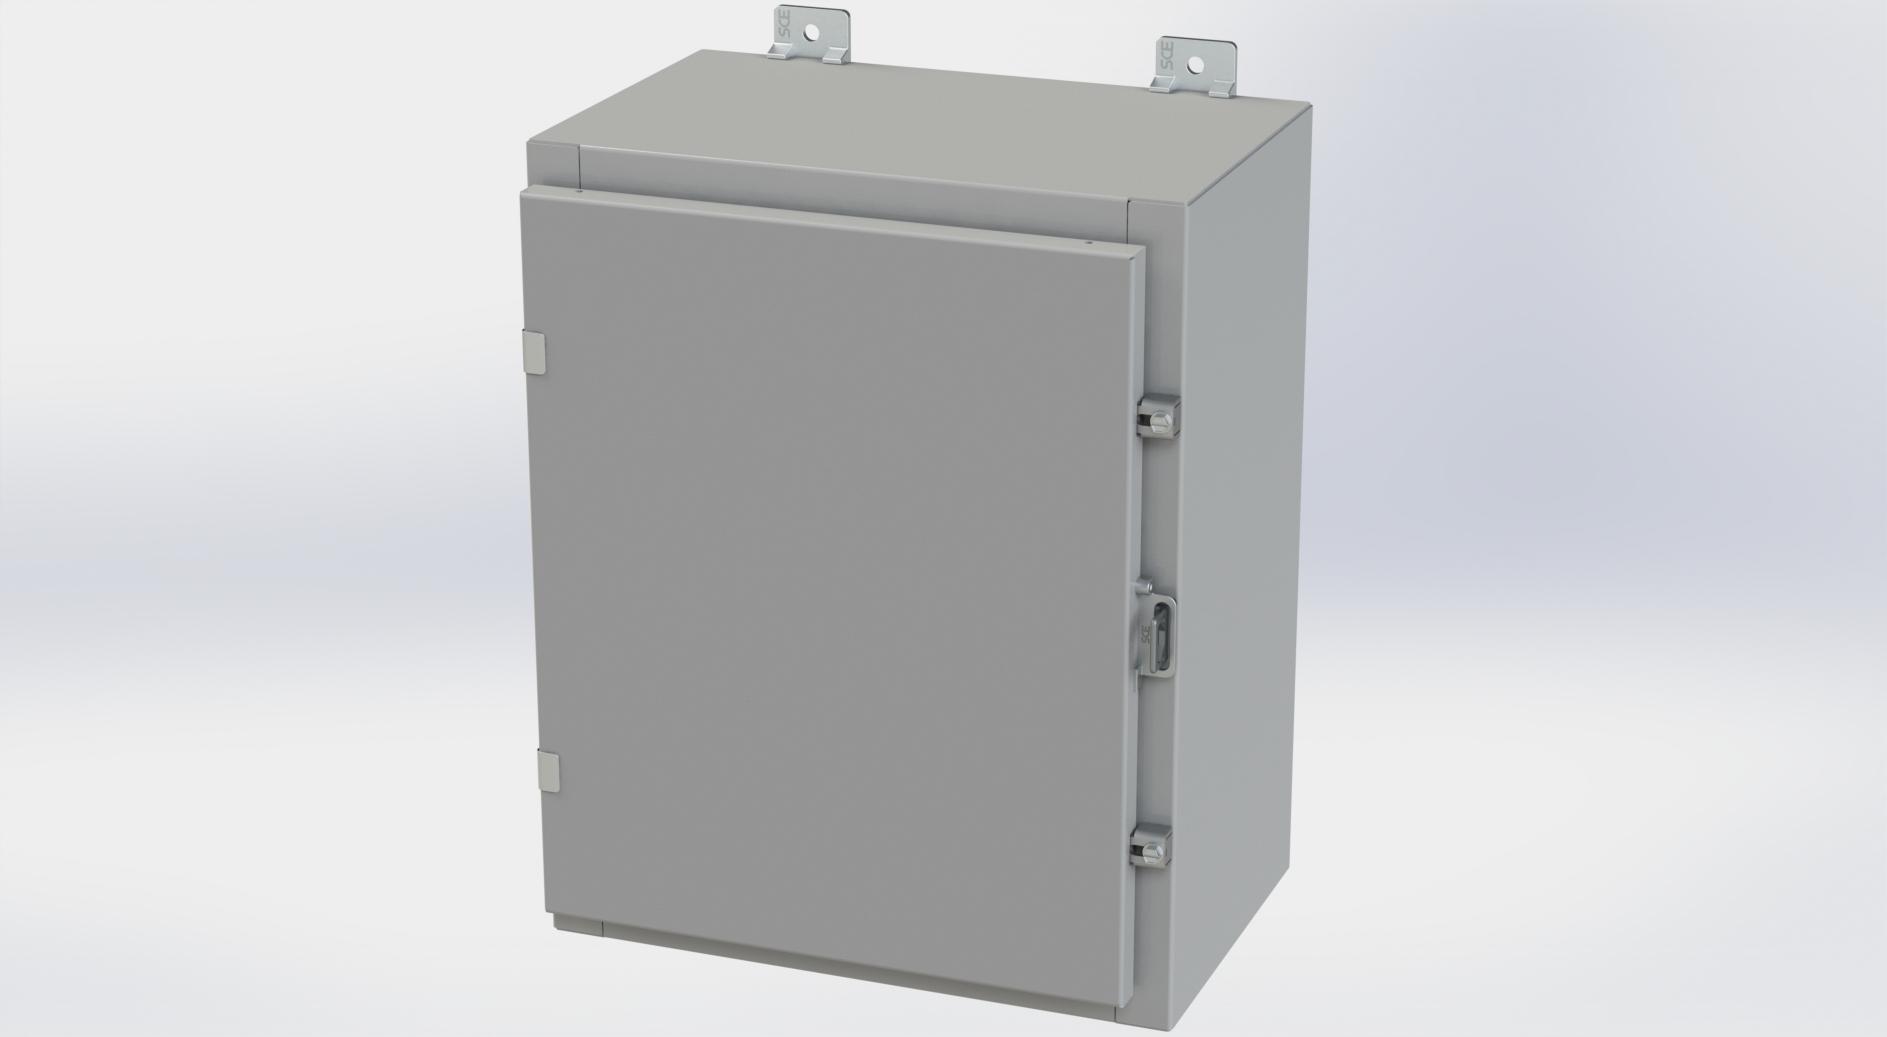 Saginaw Control SCE-20H1610LP Nema 4 LP Enclosure, Height:20.00", Width:16.00", Depth:10.00", ANSI-61 gray powder coating inside and out. Optional panels are powder coated white.